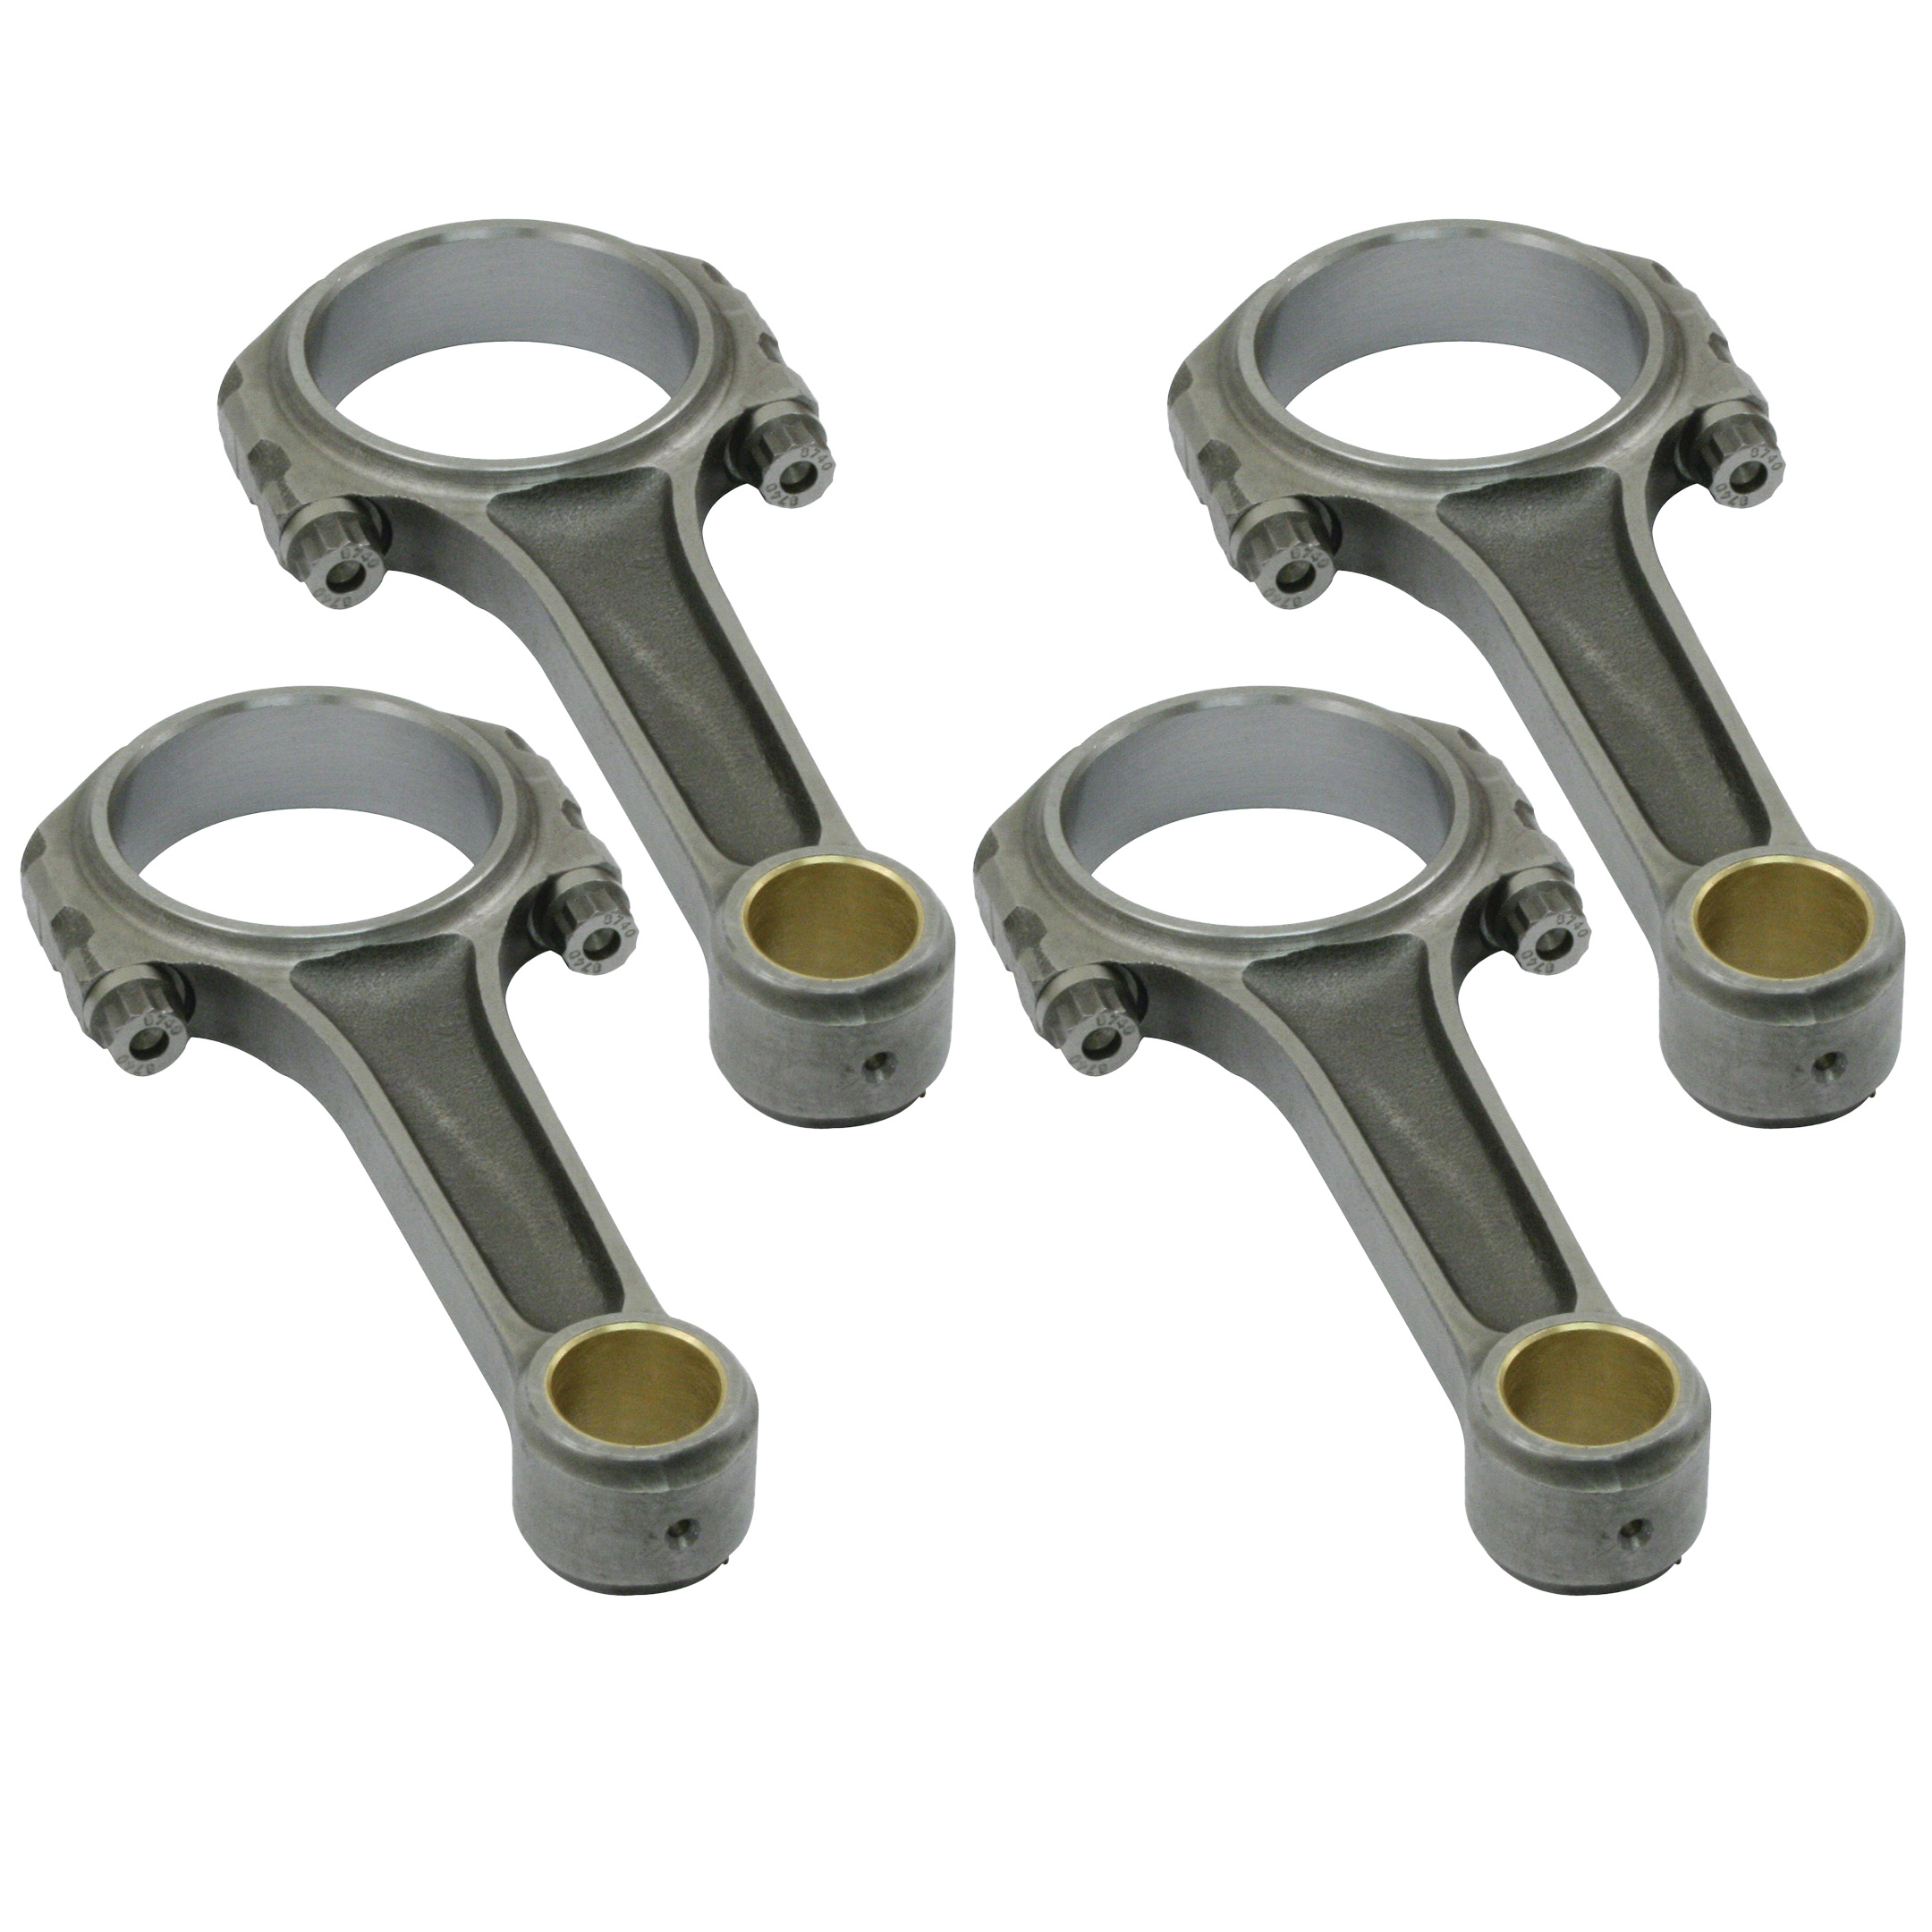 I-Beam Connecting Rods, 5.394", VW Journal 2.165"/55mm